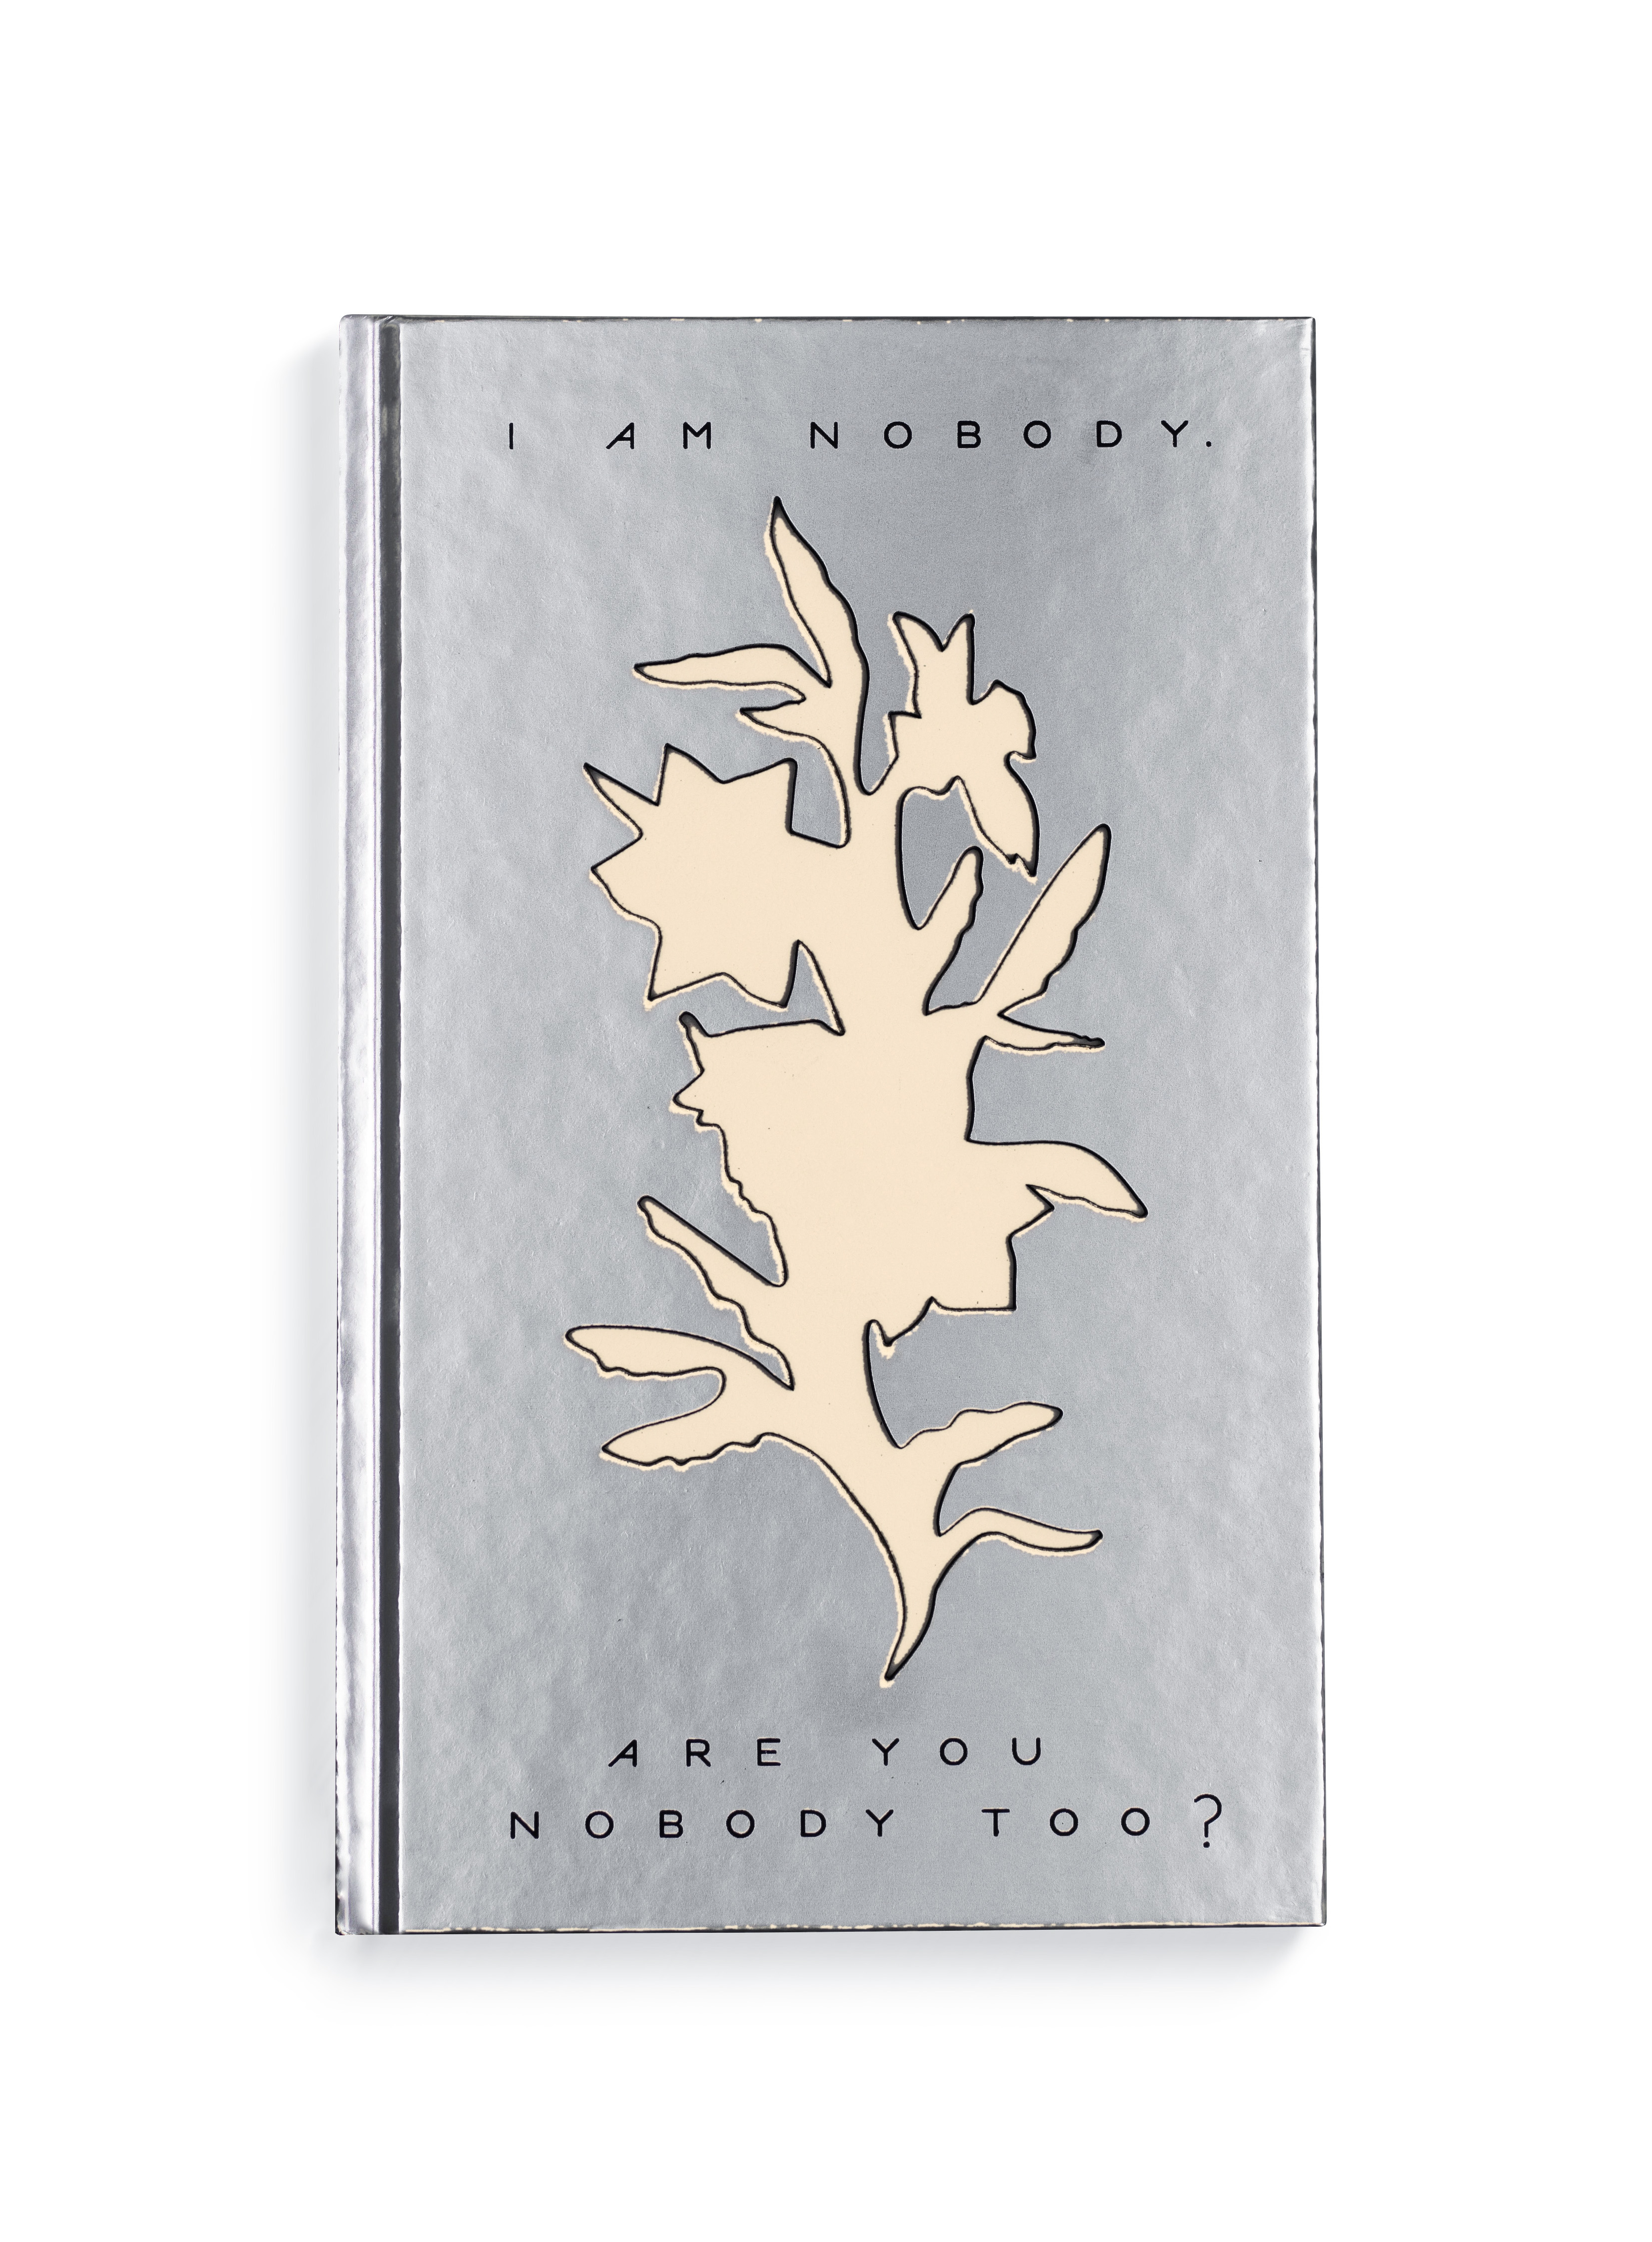 I Am Nobody. Are You Nobody Too?